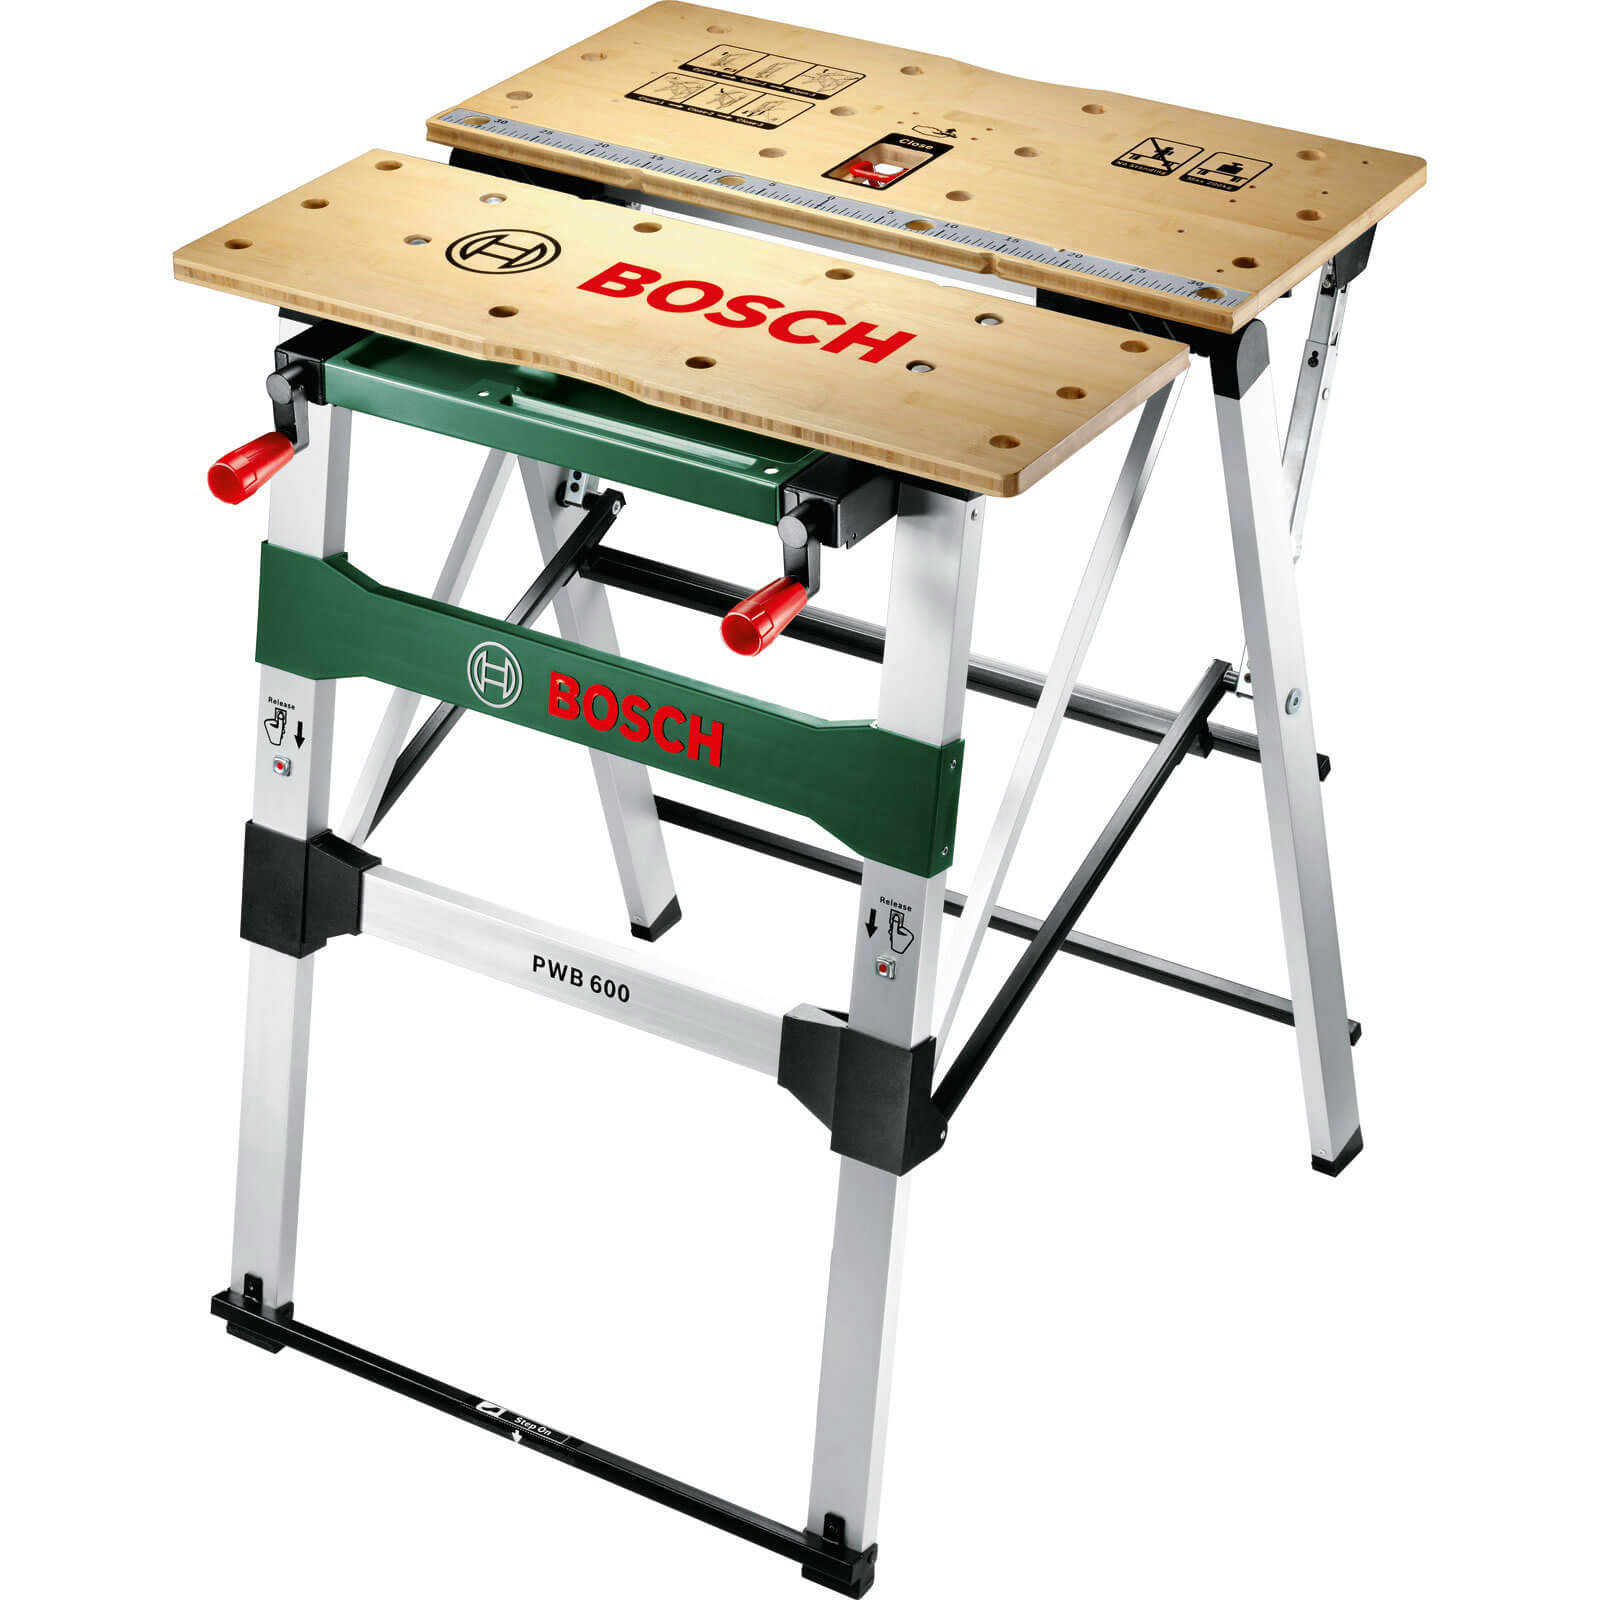 Buy cheap Folding work bench - compare Hand Tools prices ...